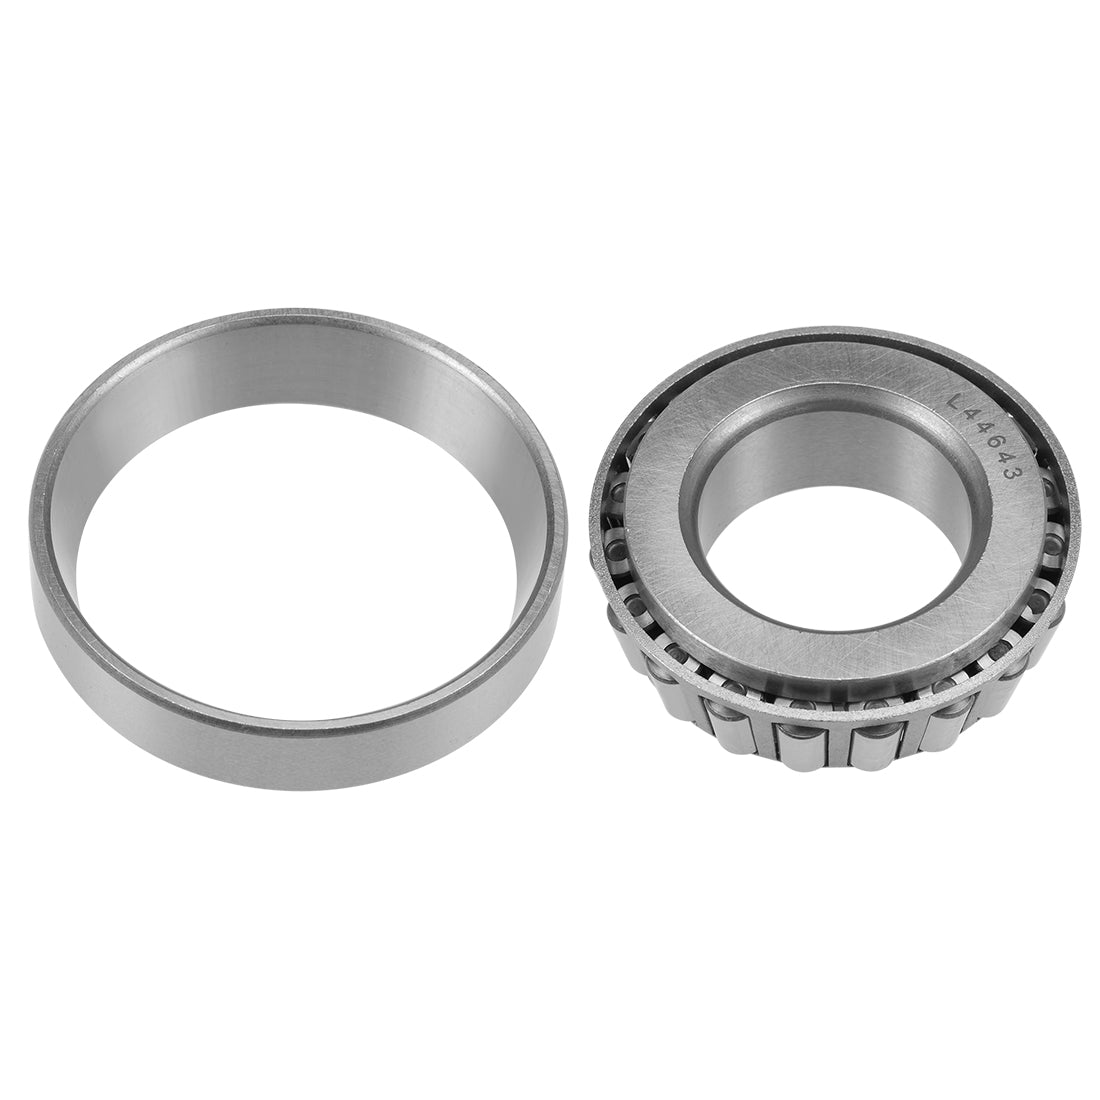 Uxcell Uxcell L44649/L44610 Tapered Roller Bearing Cone and Cup Set 1.0625" Bore 1.98" OD 2pcs